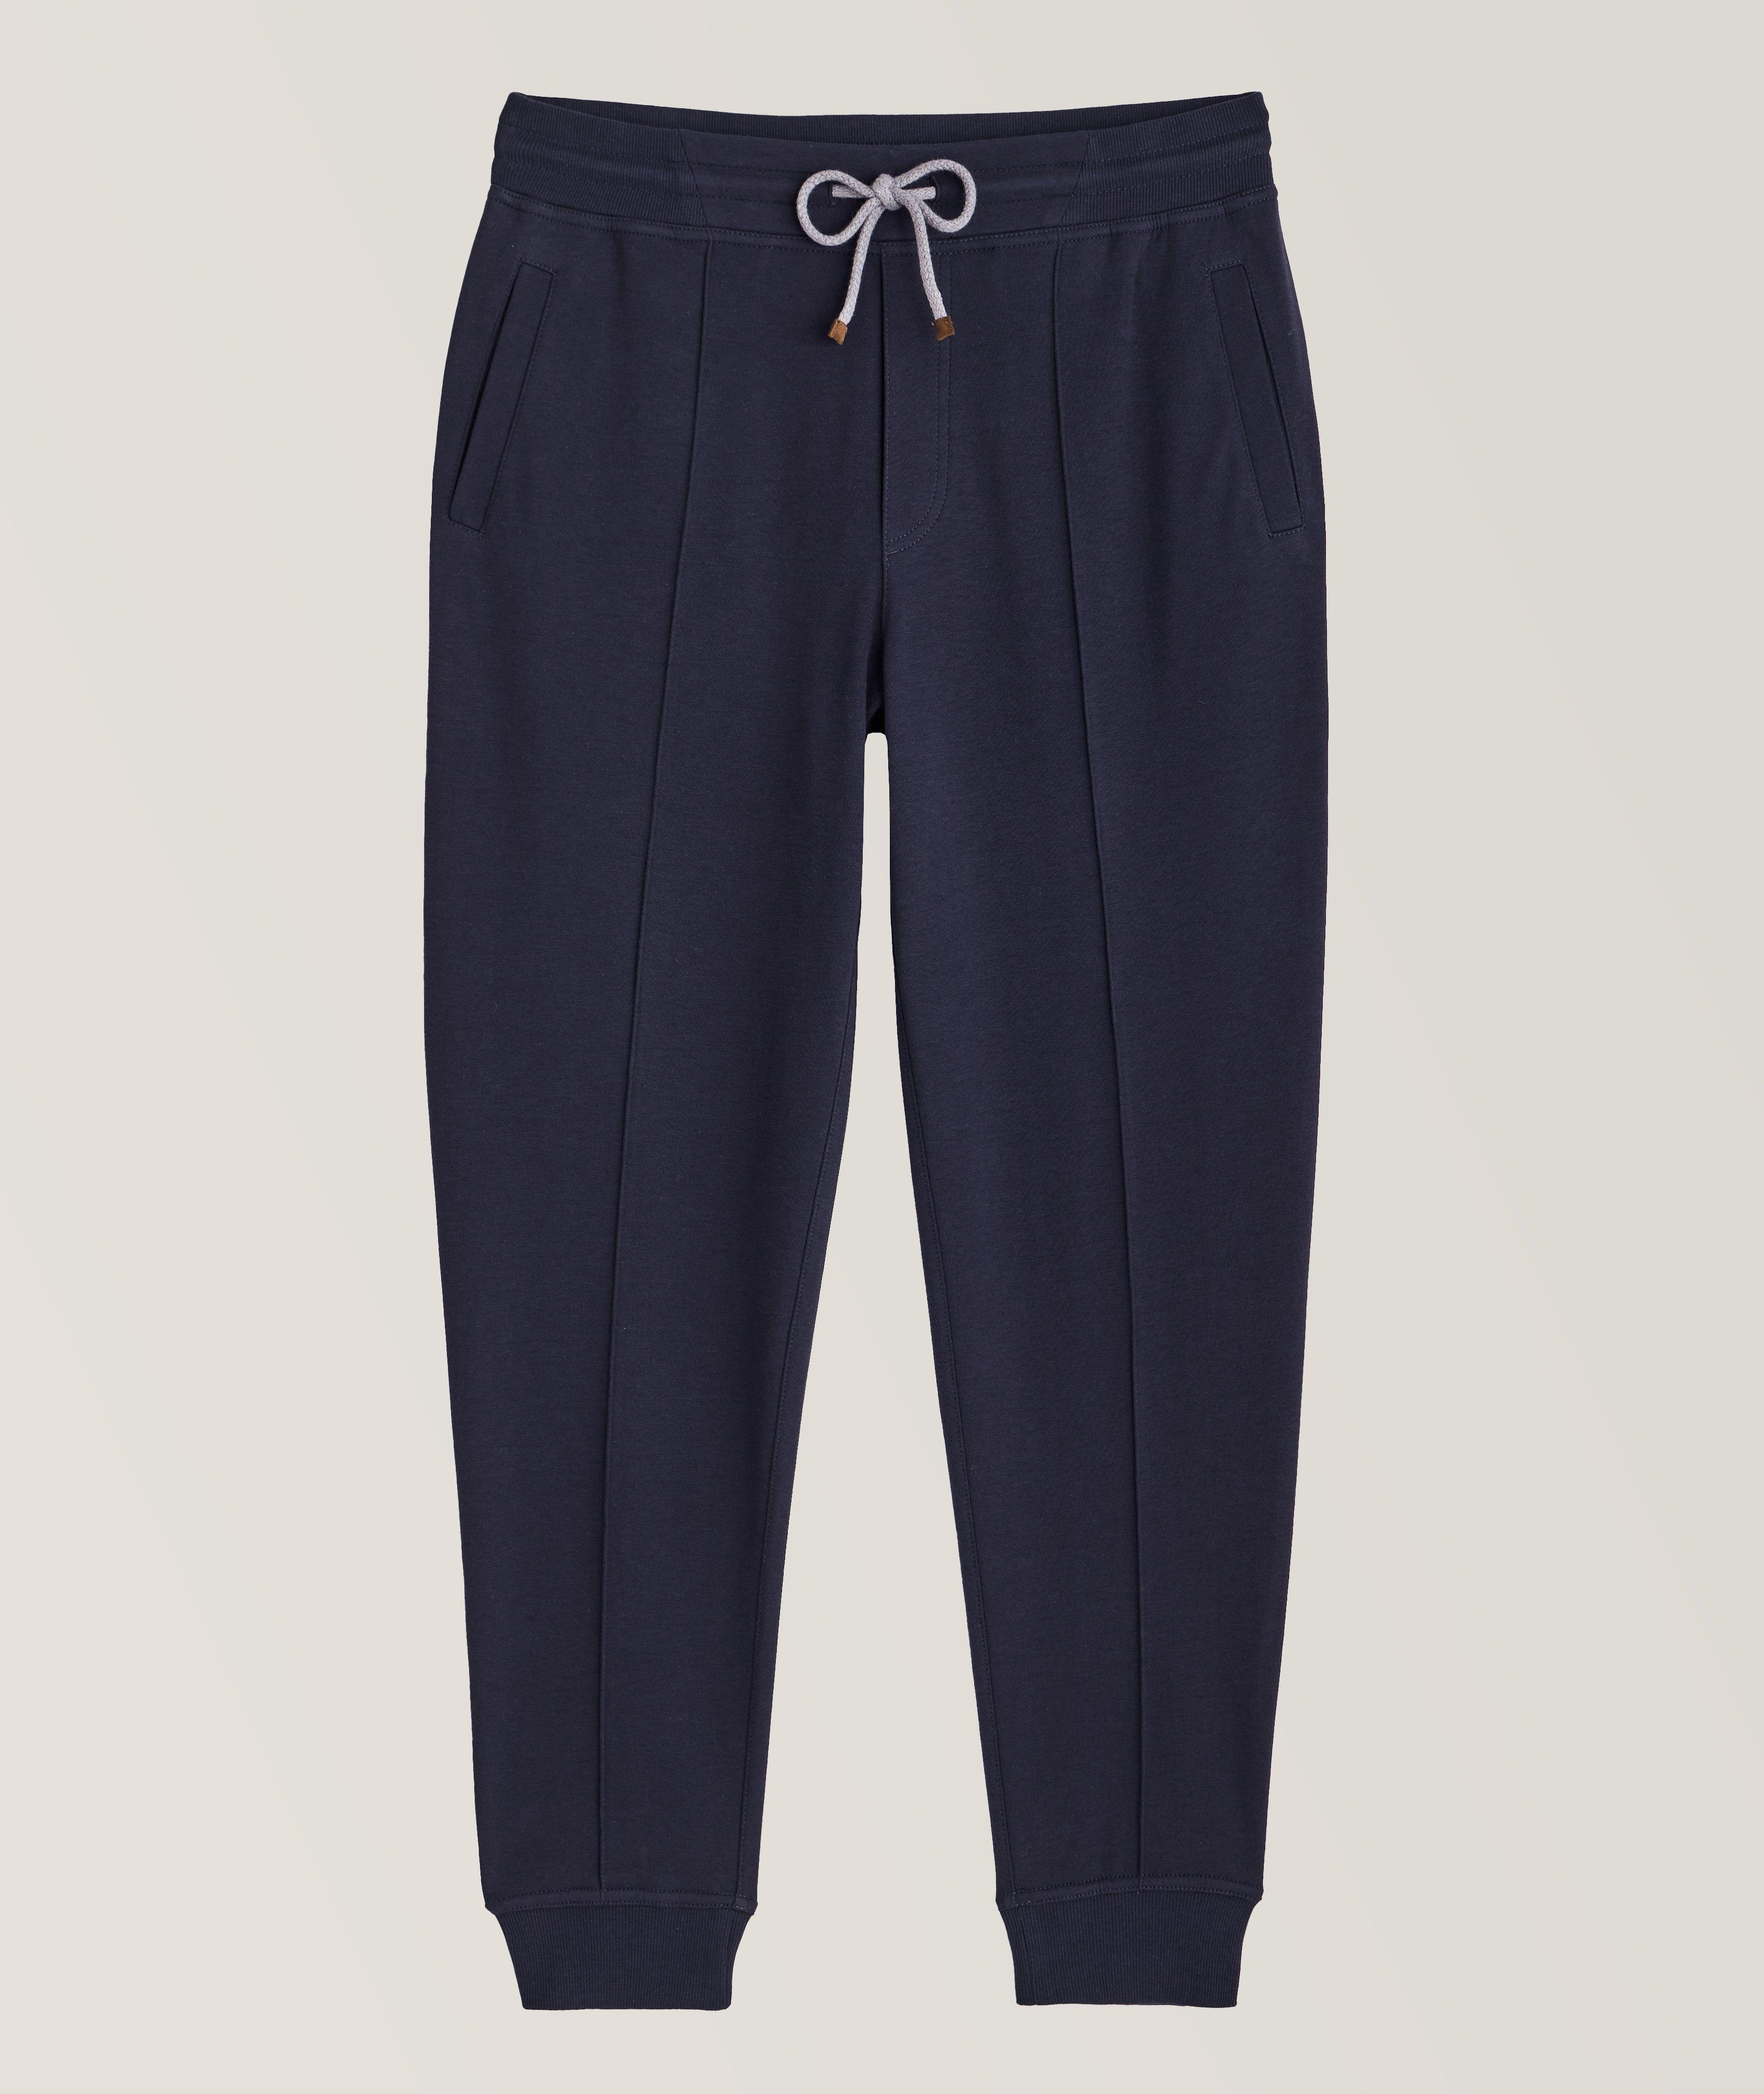 Piping Cotton-Blend Joggers image 0